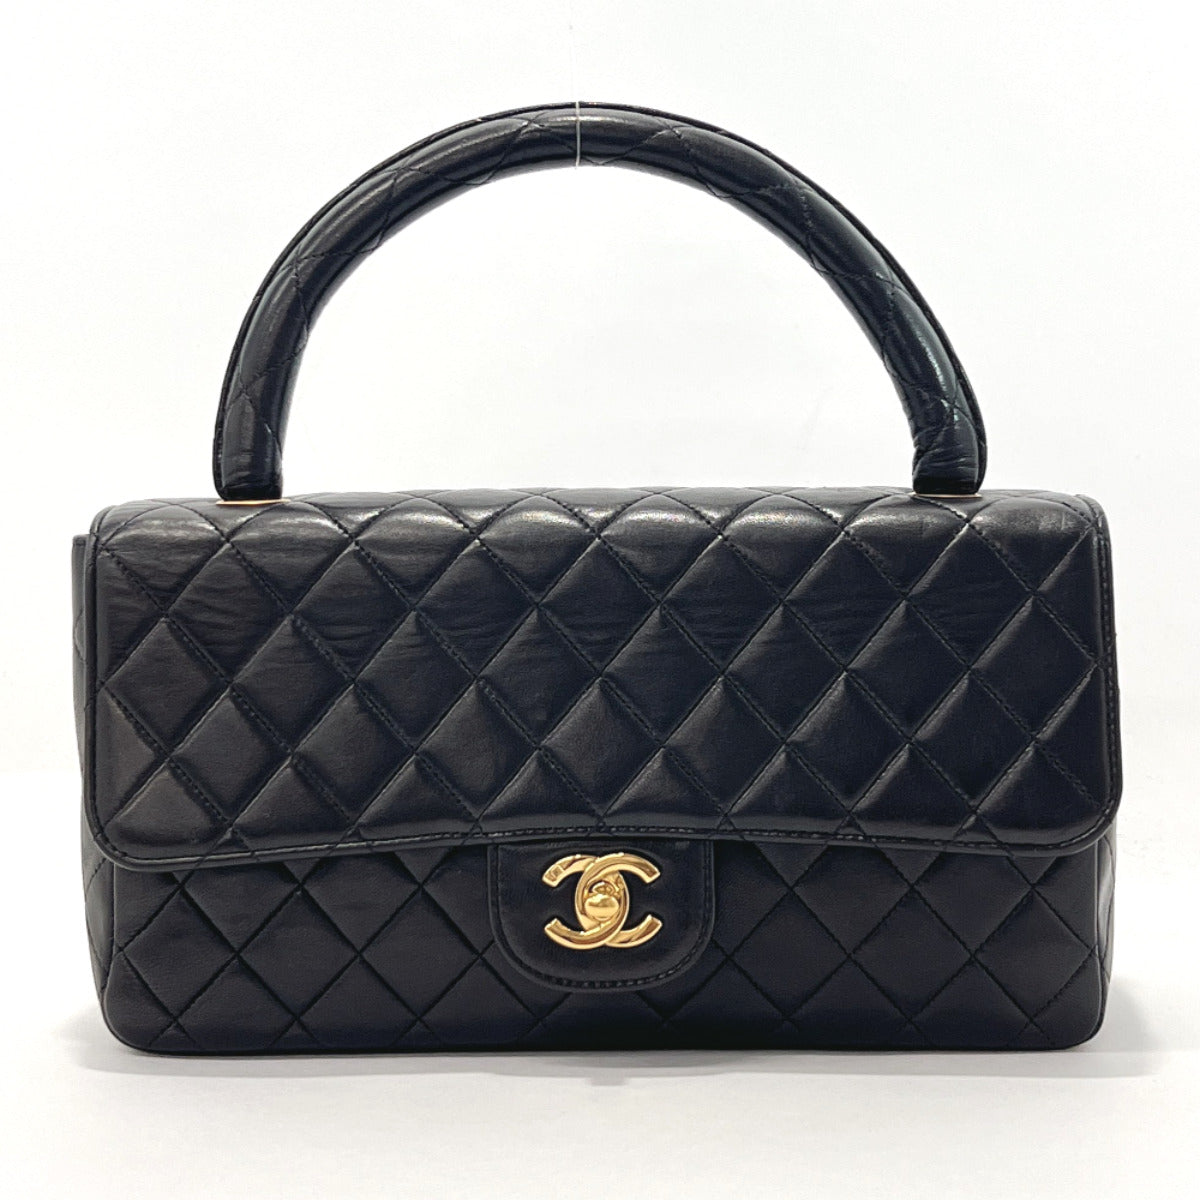 Buy Free Shipping With seal No. 1 CHANEL Chanel matelasse here